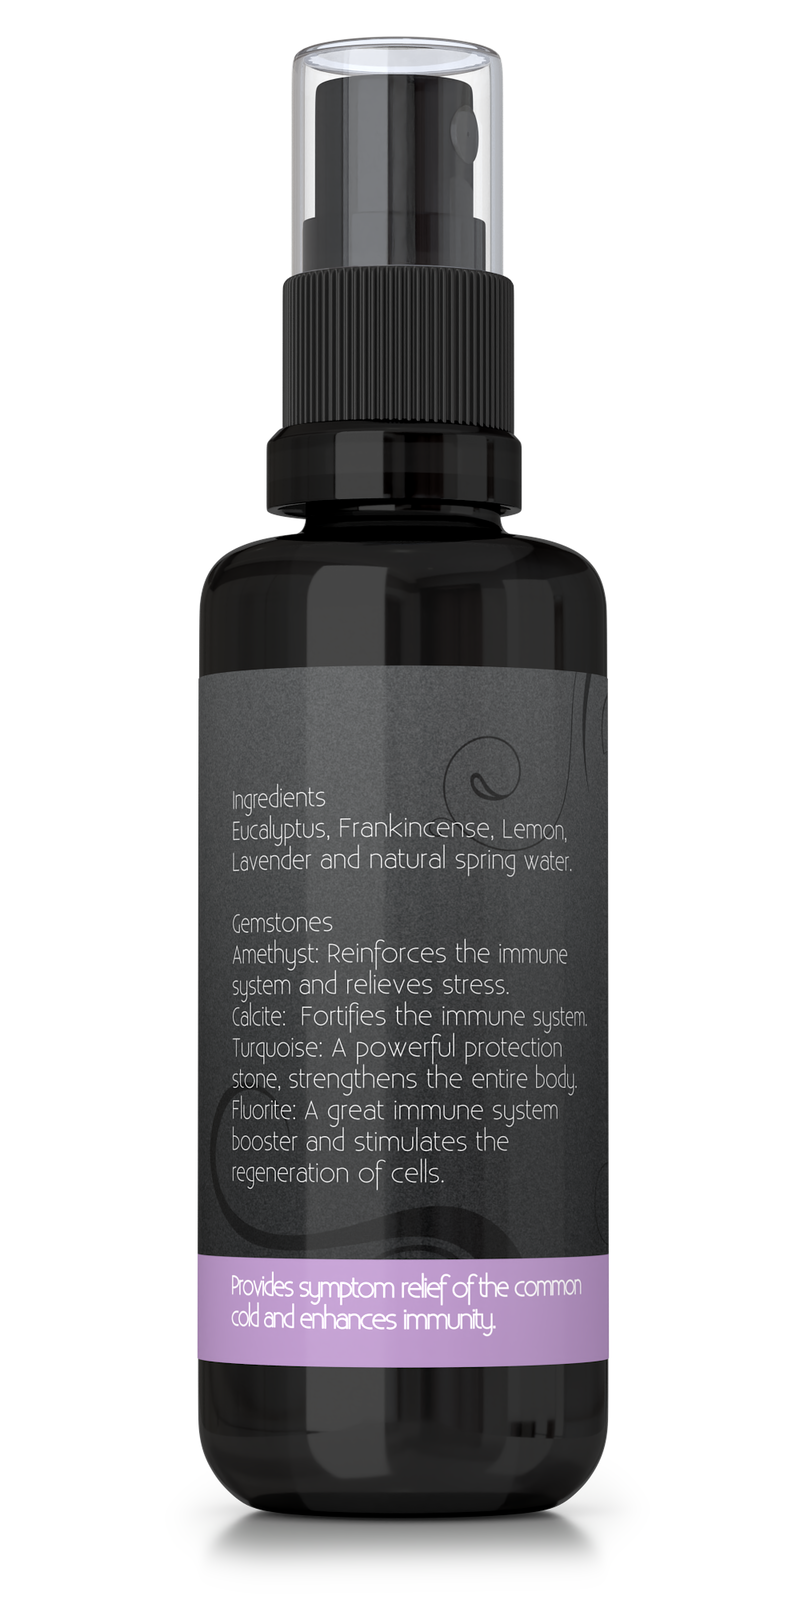 Immunity aromatherapy spray with essential oils and gemstones, backside  of bottle showing ingredients